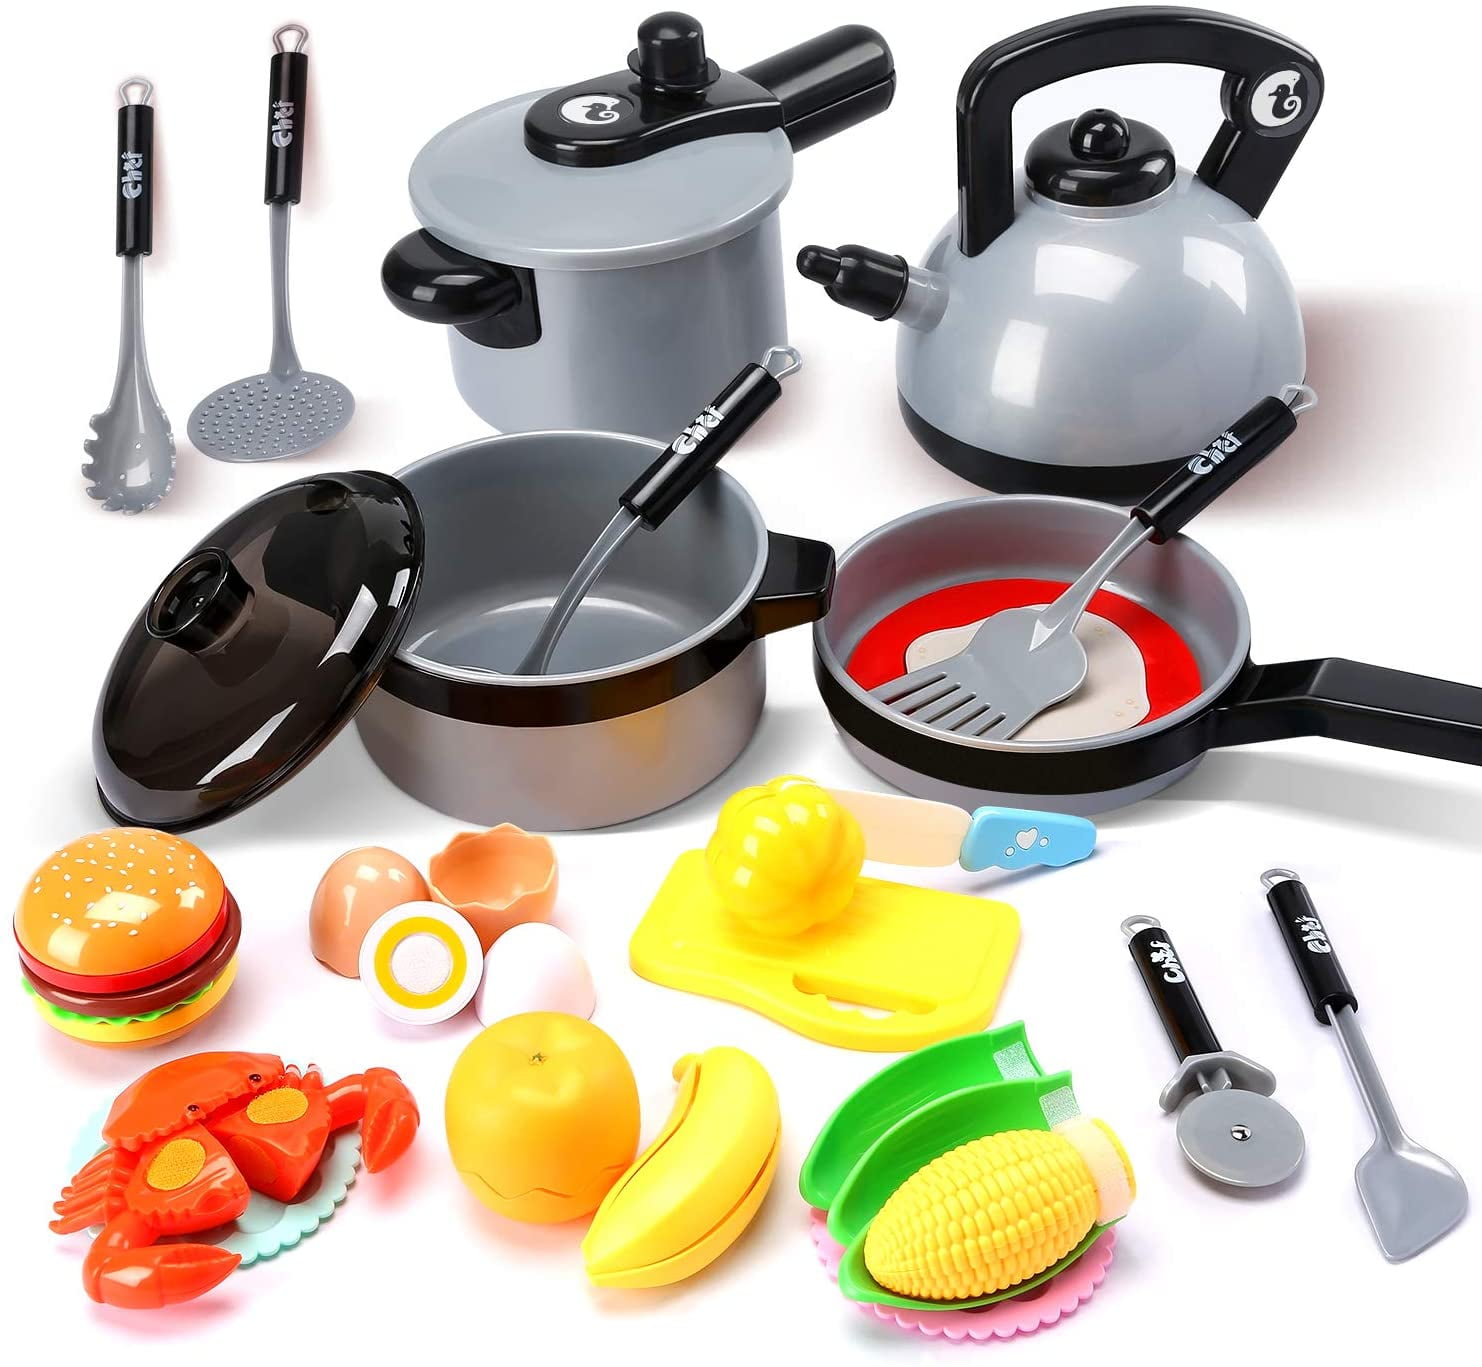 Red 11Pcs Set Kitchen Utensils Pots Cooking Pans Food Dishes Cookware Kids Toy 